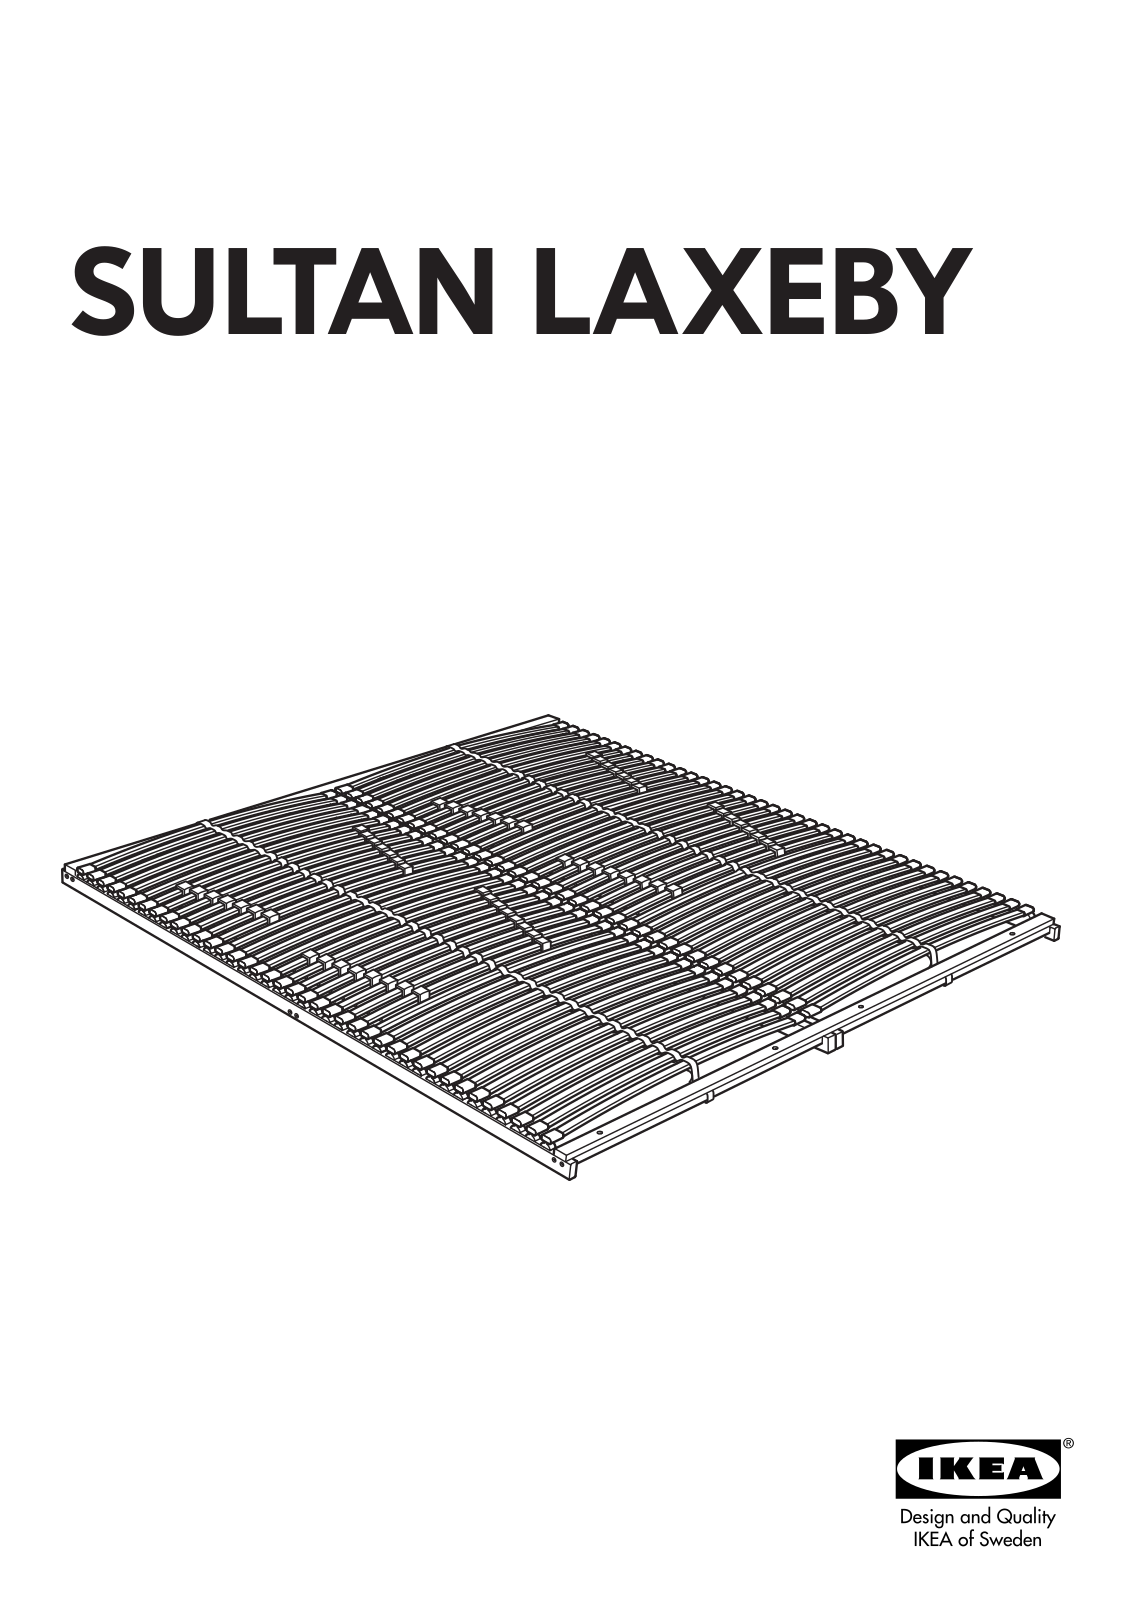 Ikea SULTAN LAXEBY ASSEMBLY User Manual